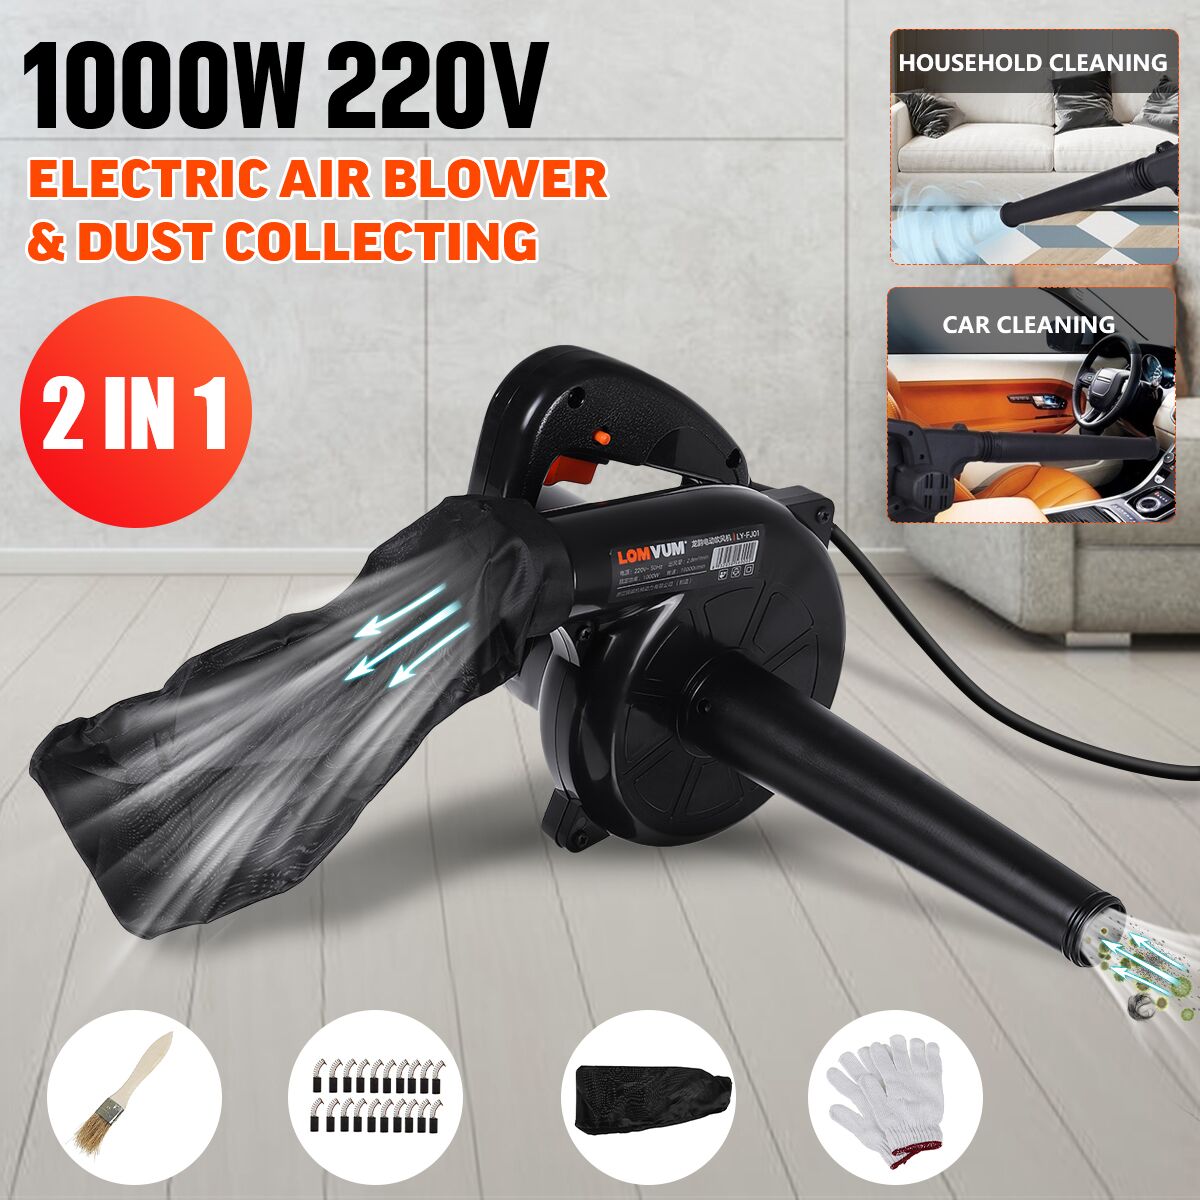 1000W-220V-2-in-1-Electric-Air-Blower-16000rmin-Handheld-Blowing--Dust-Collecting-Mechine-1735961-2